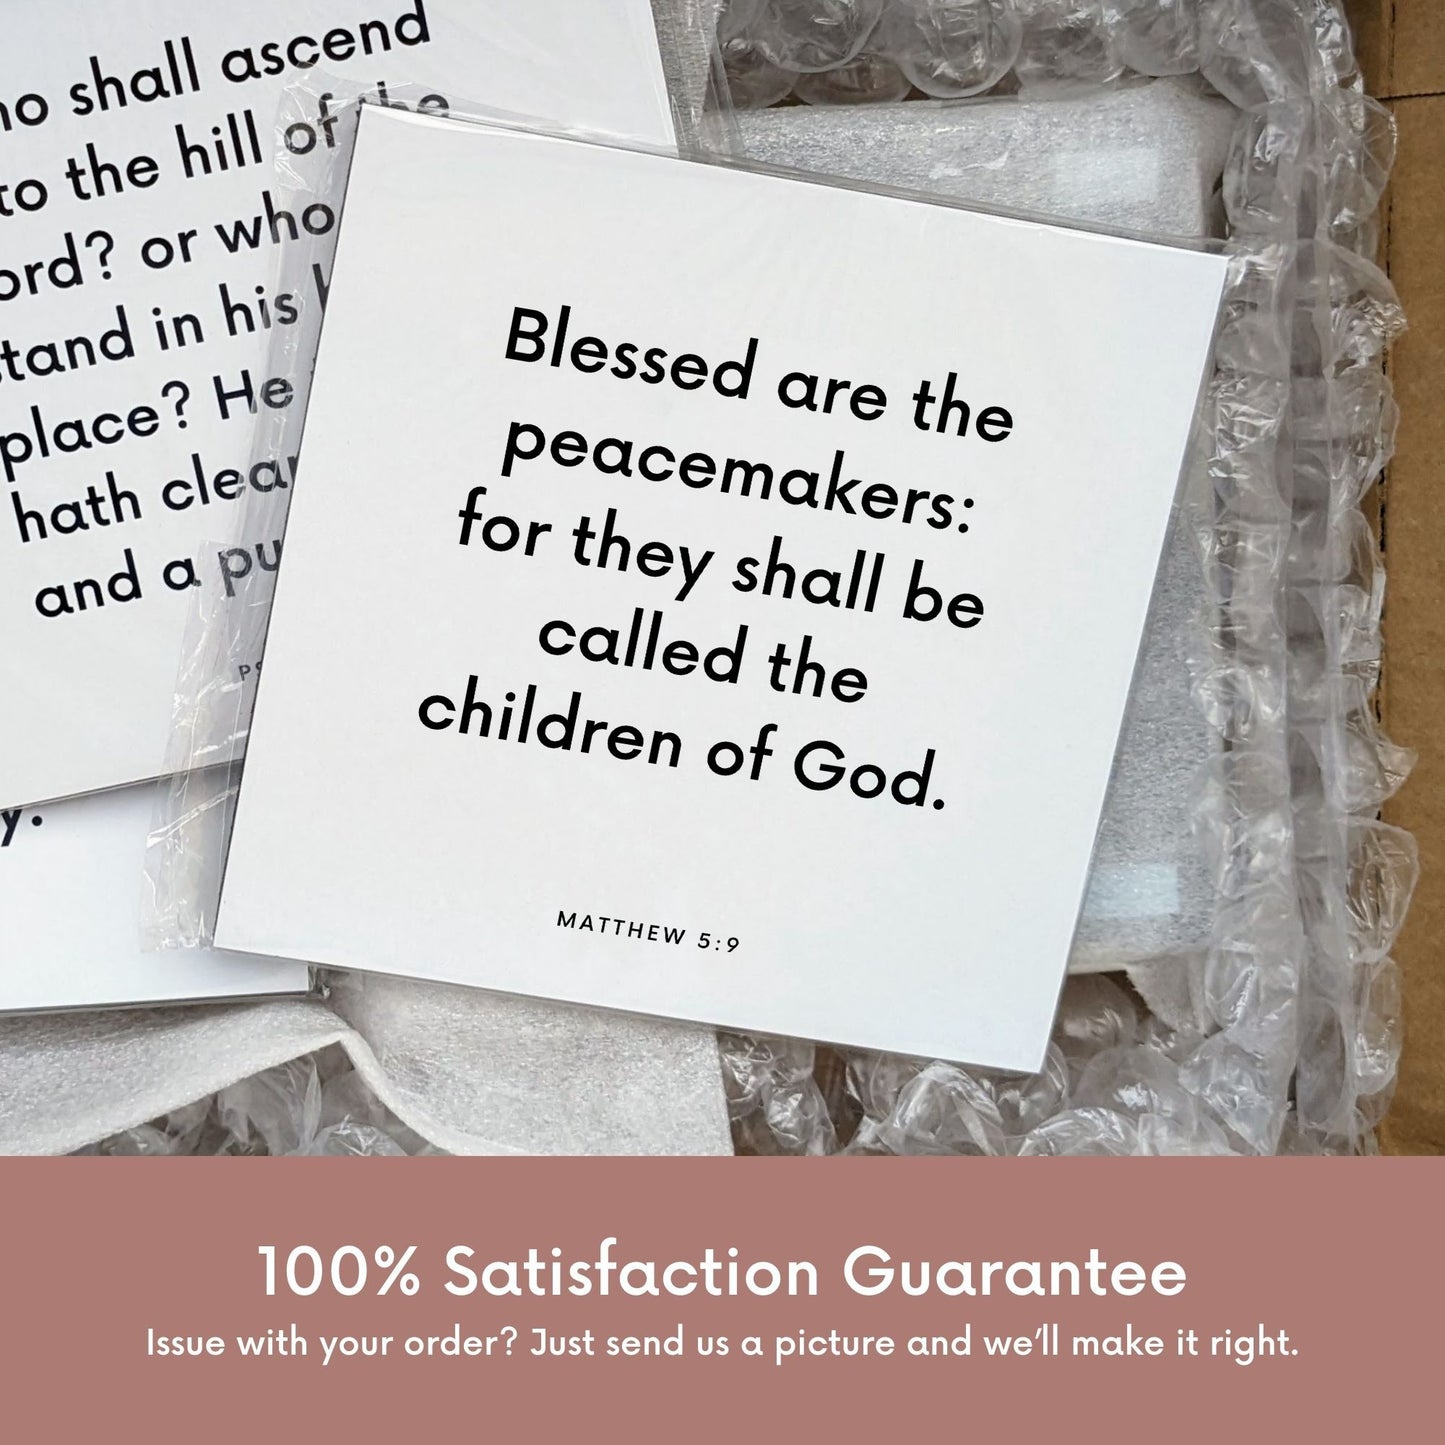 Shipping materials for scripture tile of Matthew 5:9 - "Blessed are the peacemakers"